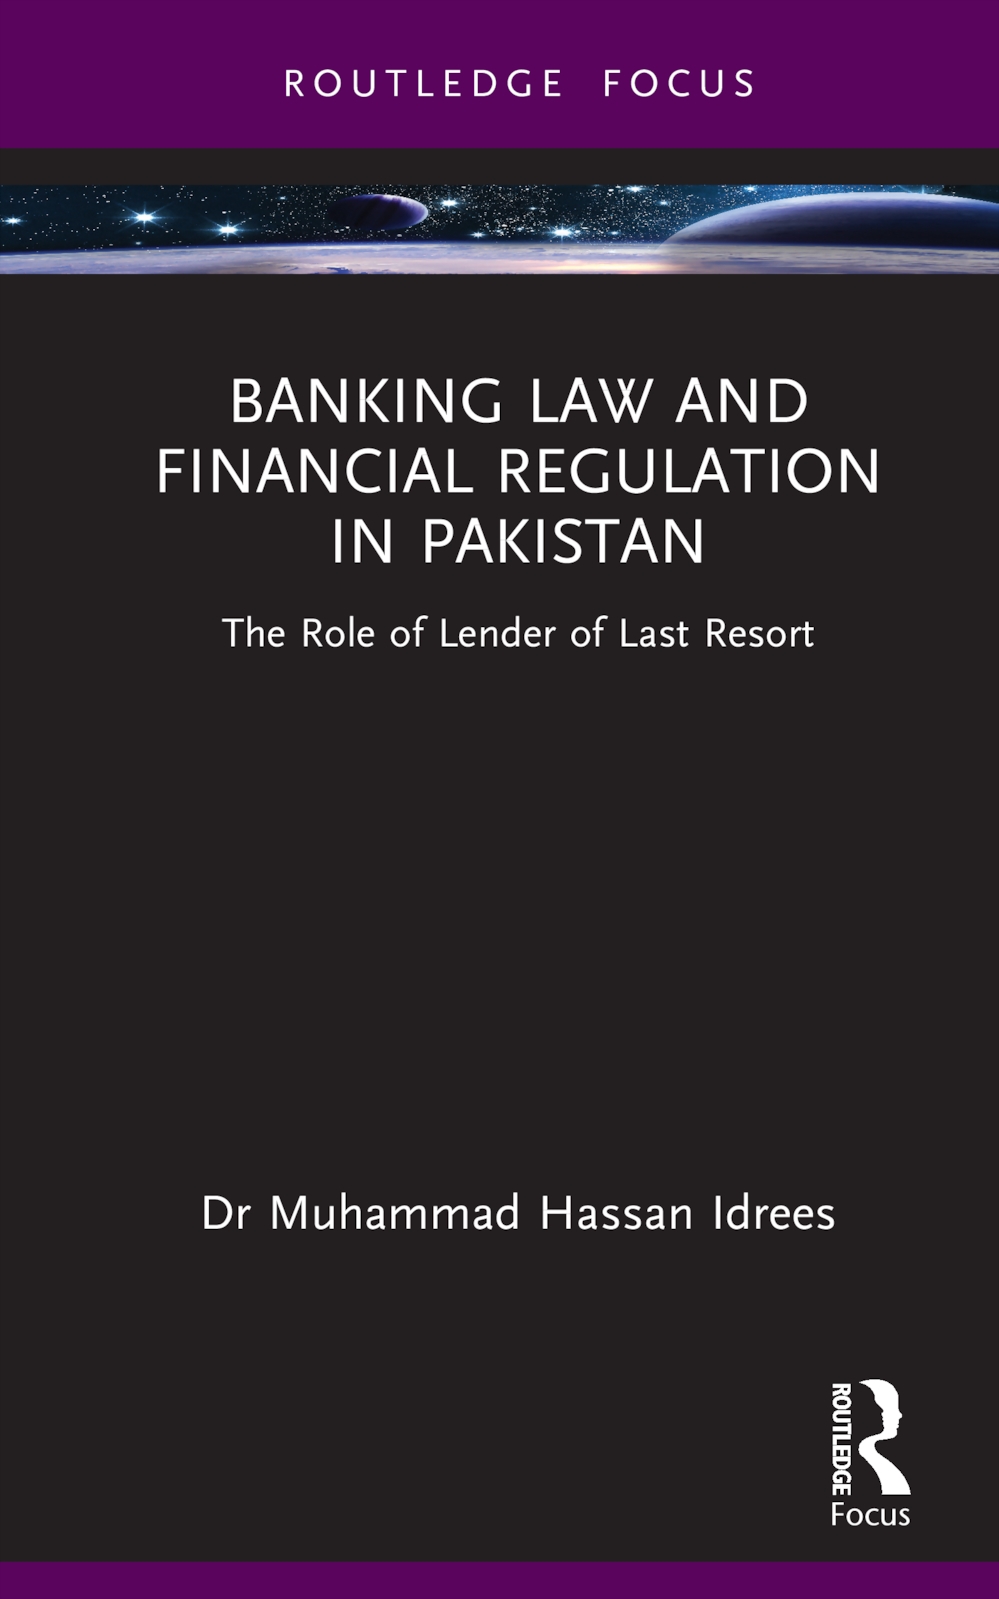 Banking Law and Financial Regulation in Pakistan: The Role of Lender of Last Resort